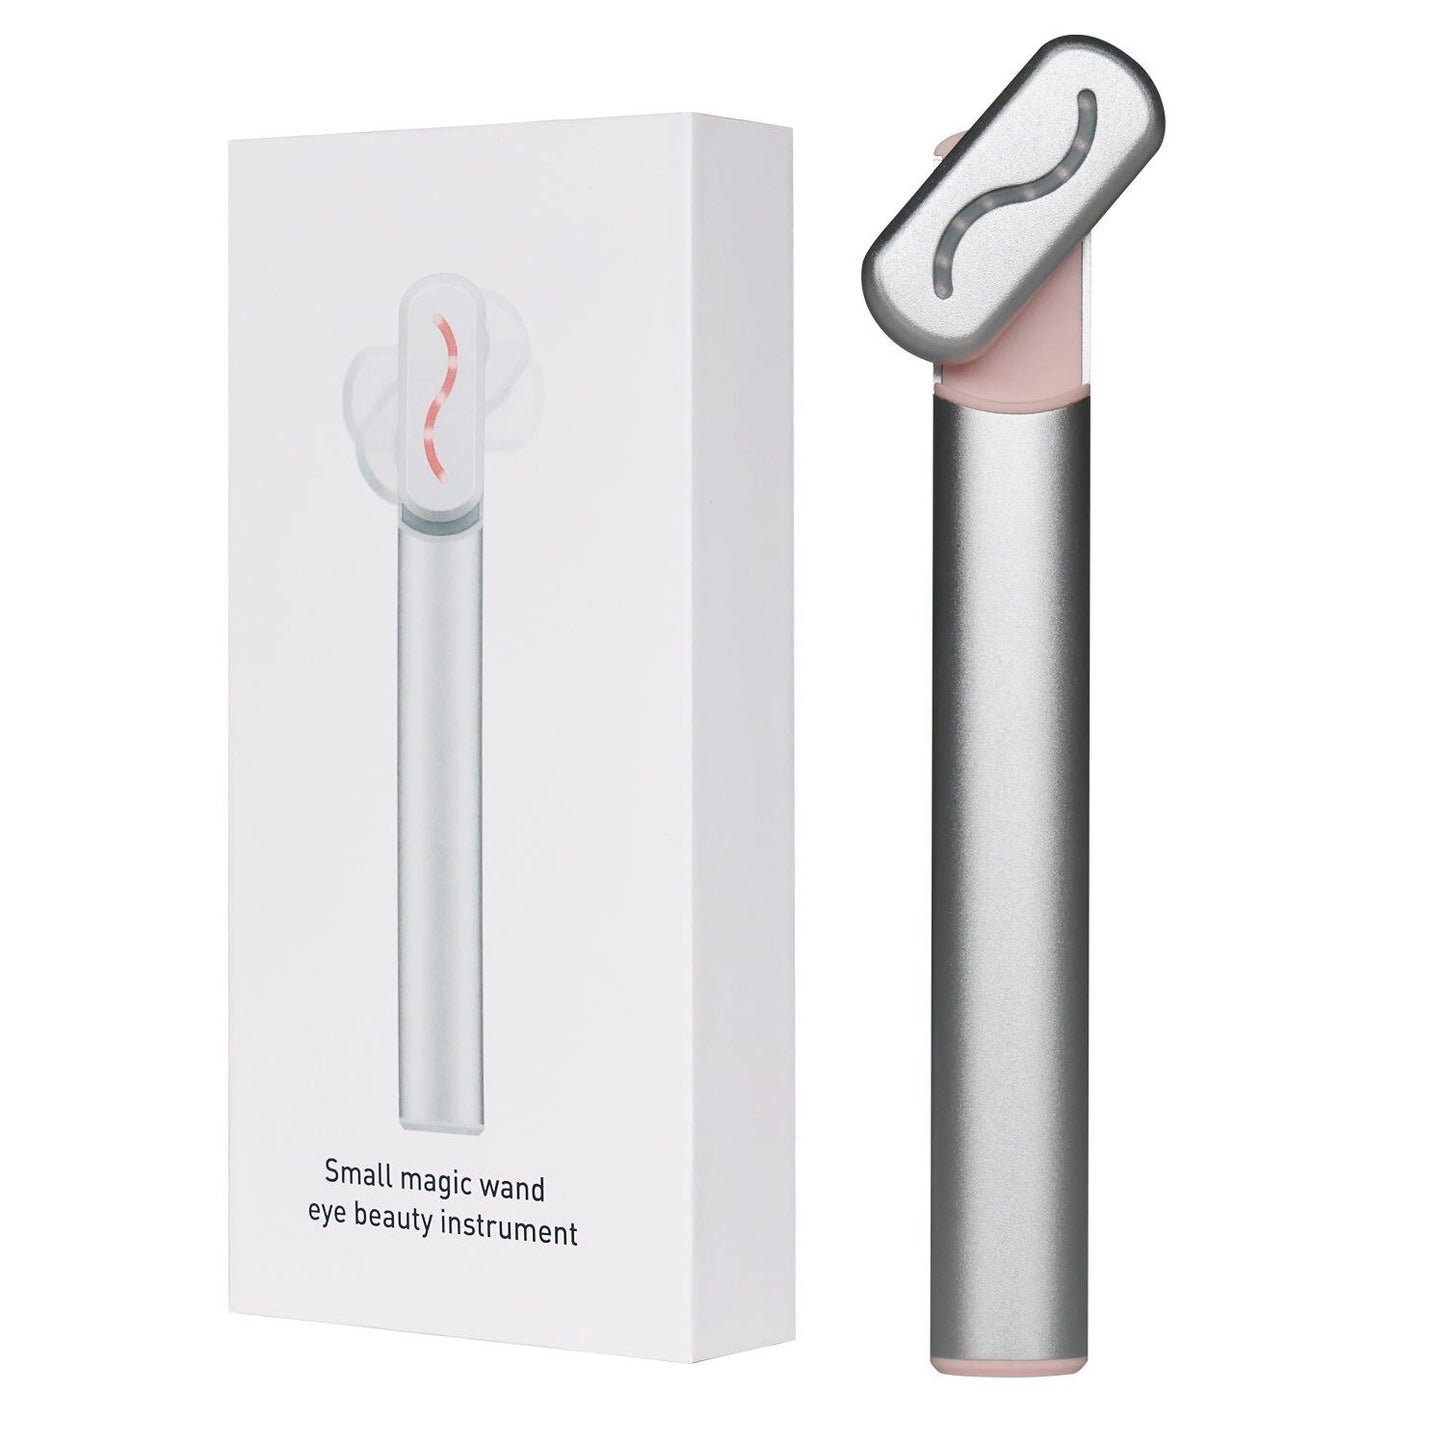 LED infrared wand - Red Light Beauty Massager